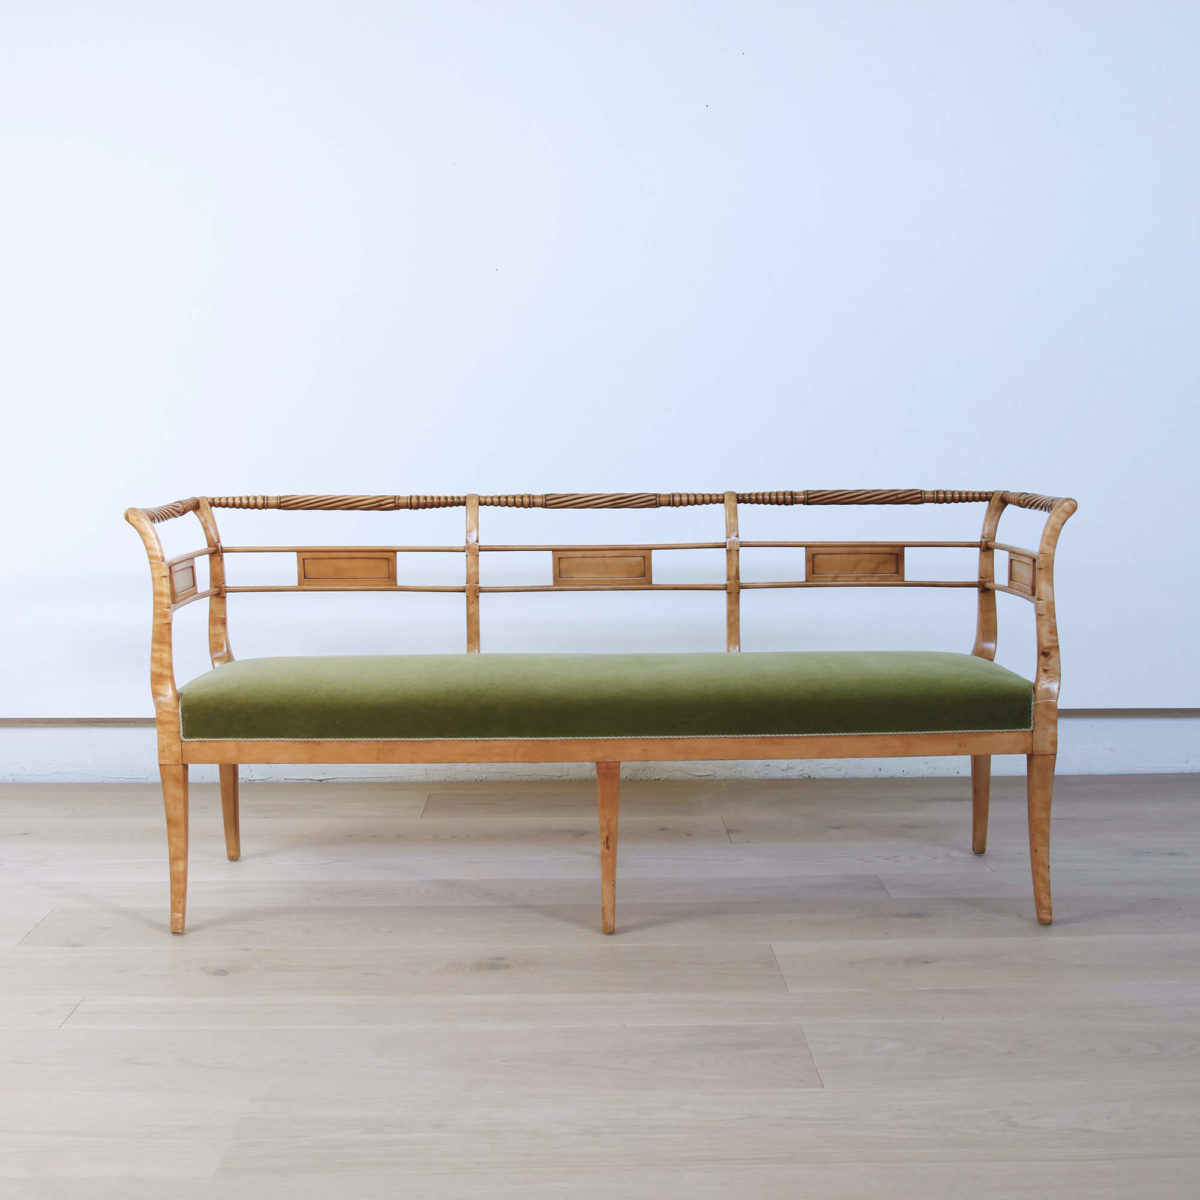 19th Century Northern European Bench - Mull Birch Lawton Carved Flame